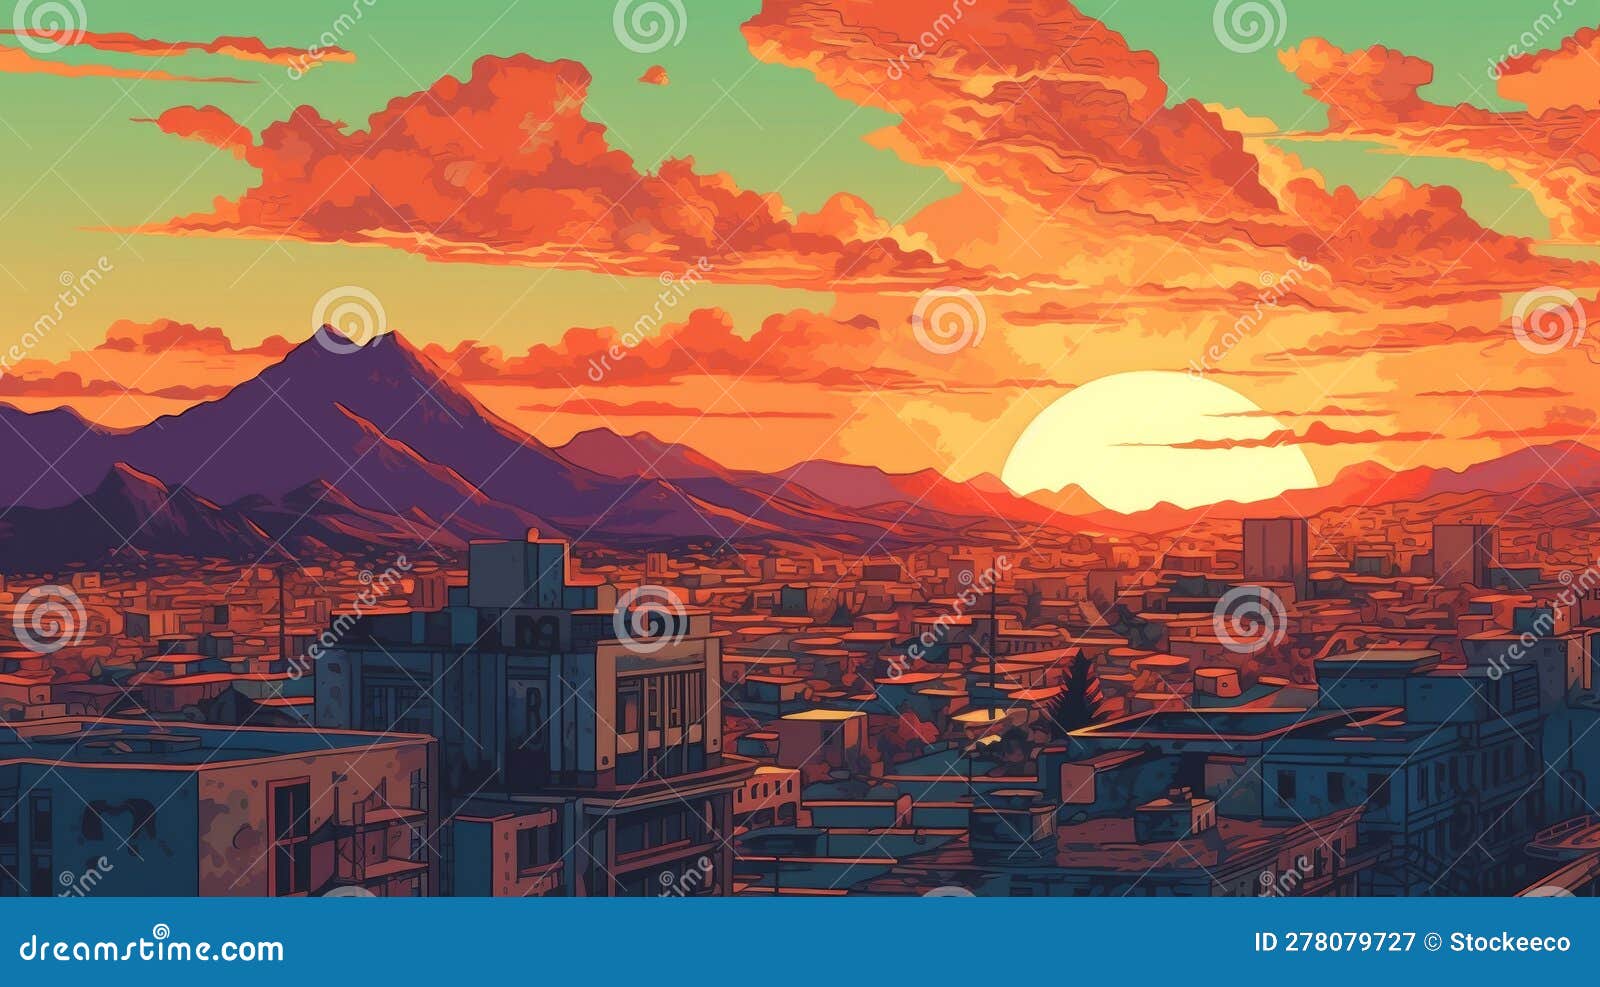 el paso sunset in 1910s: a pixel art close-up